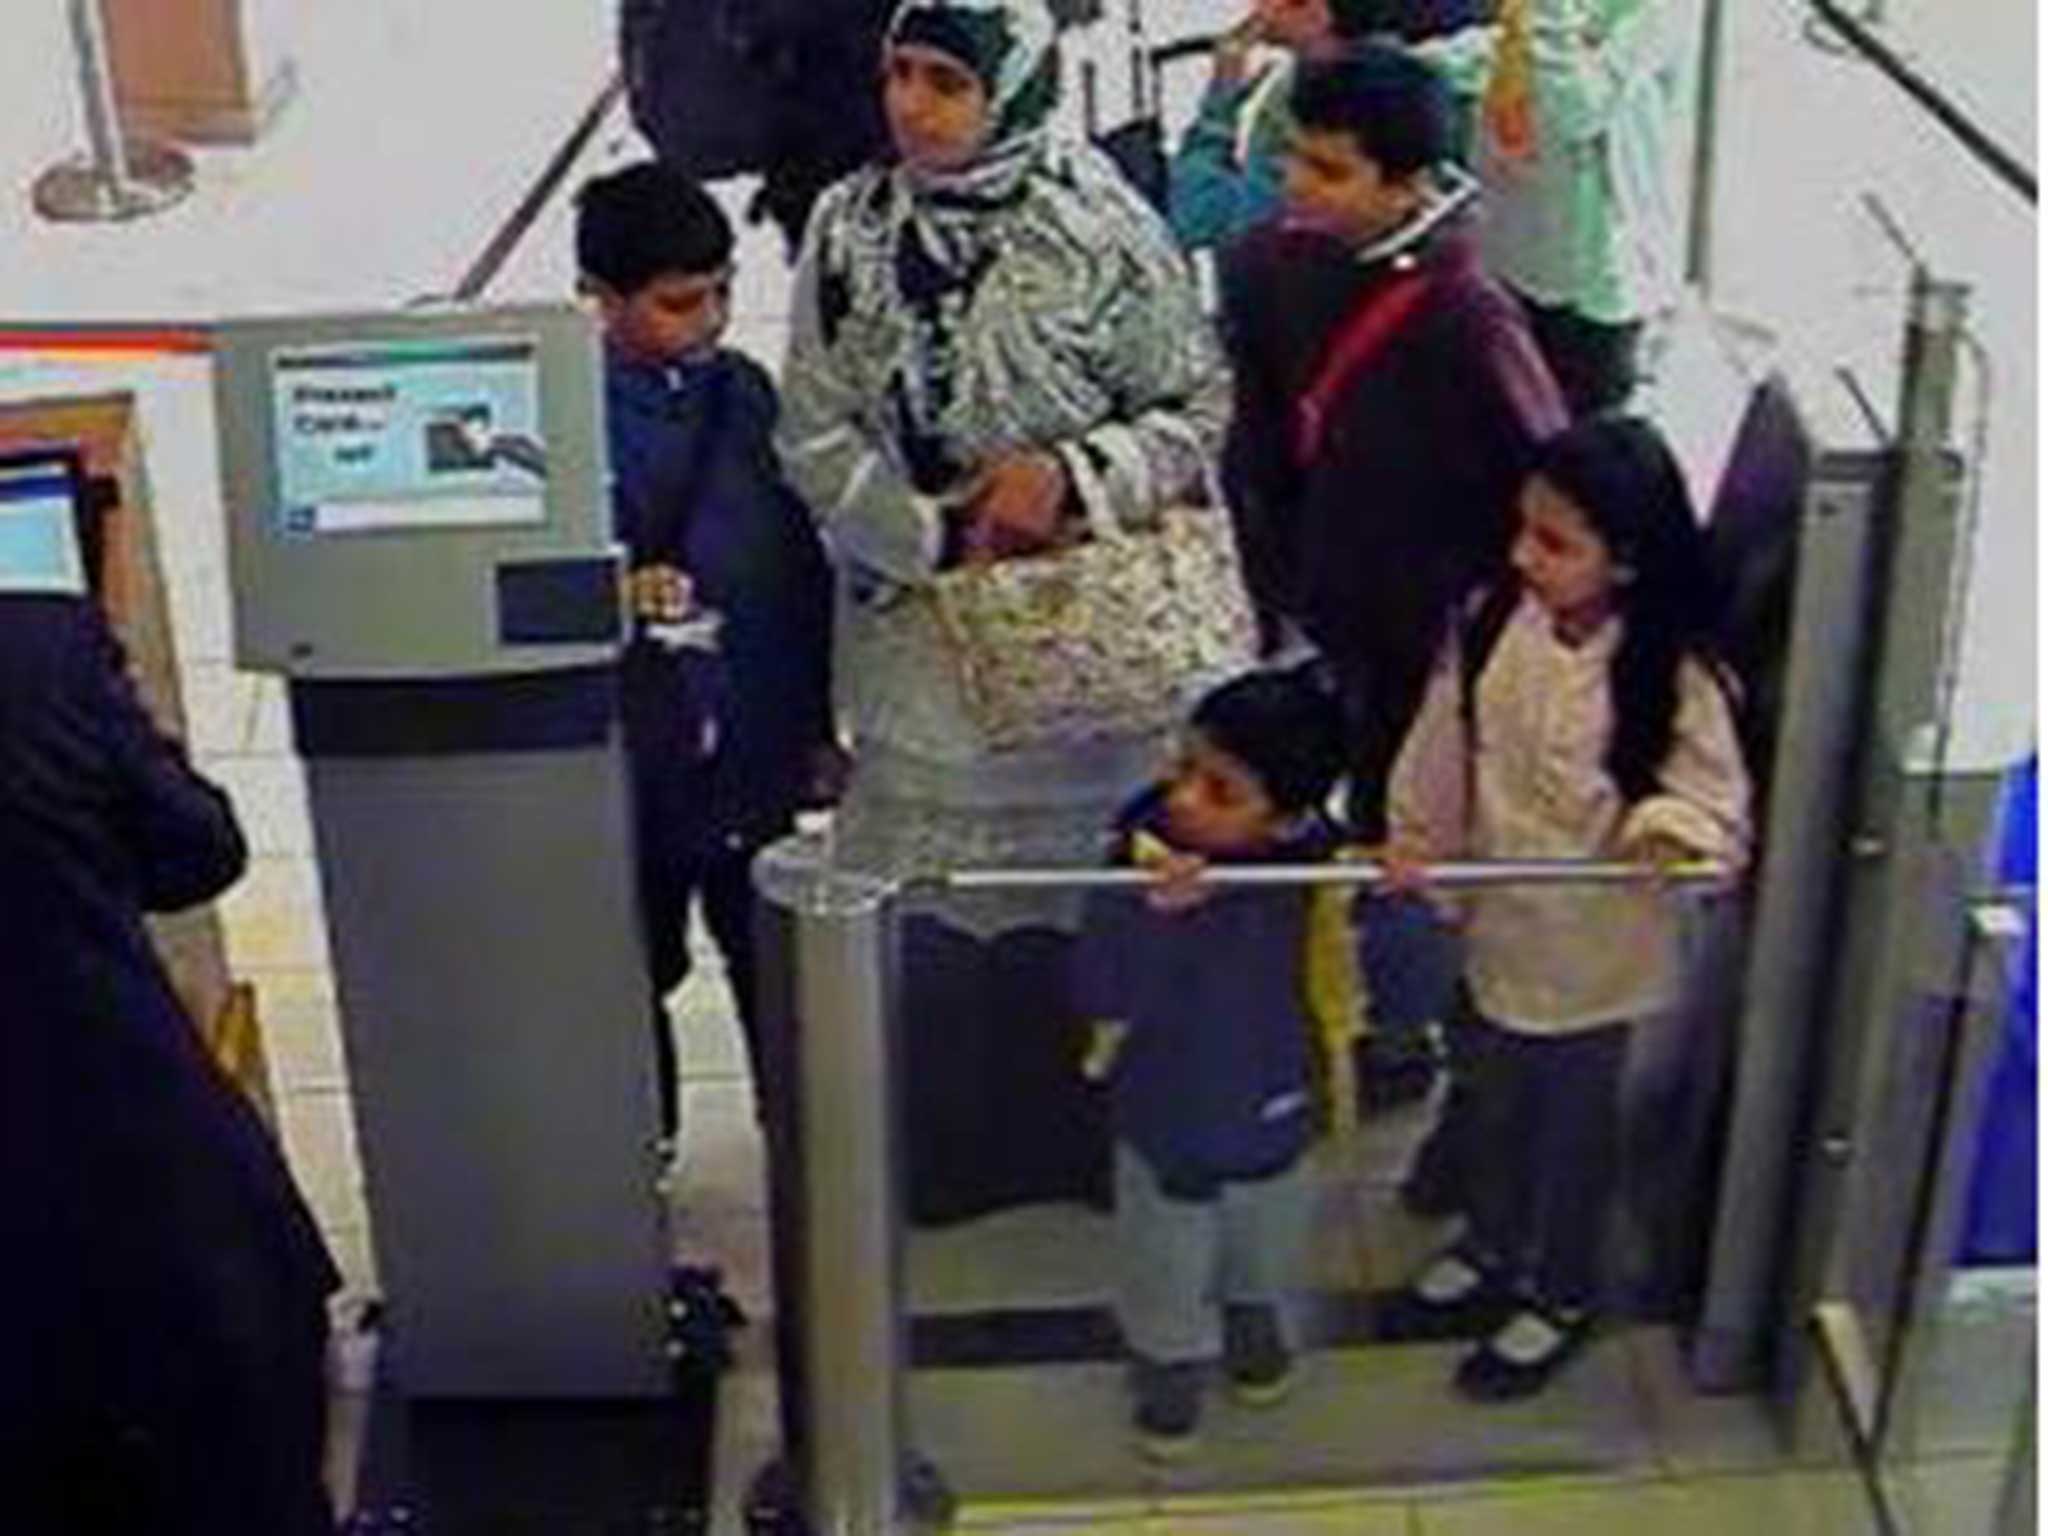 CCTV captured the family at City Airport